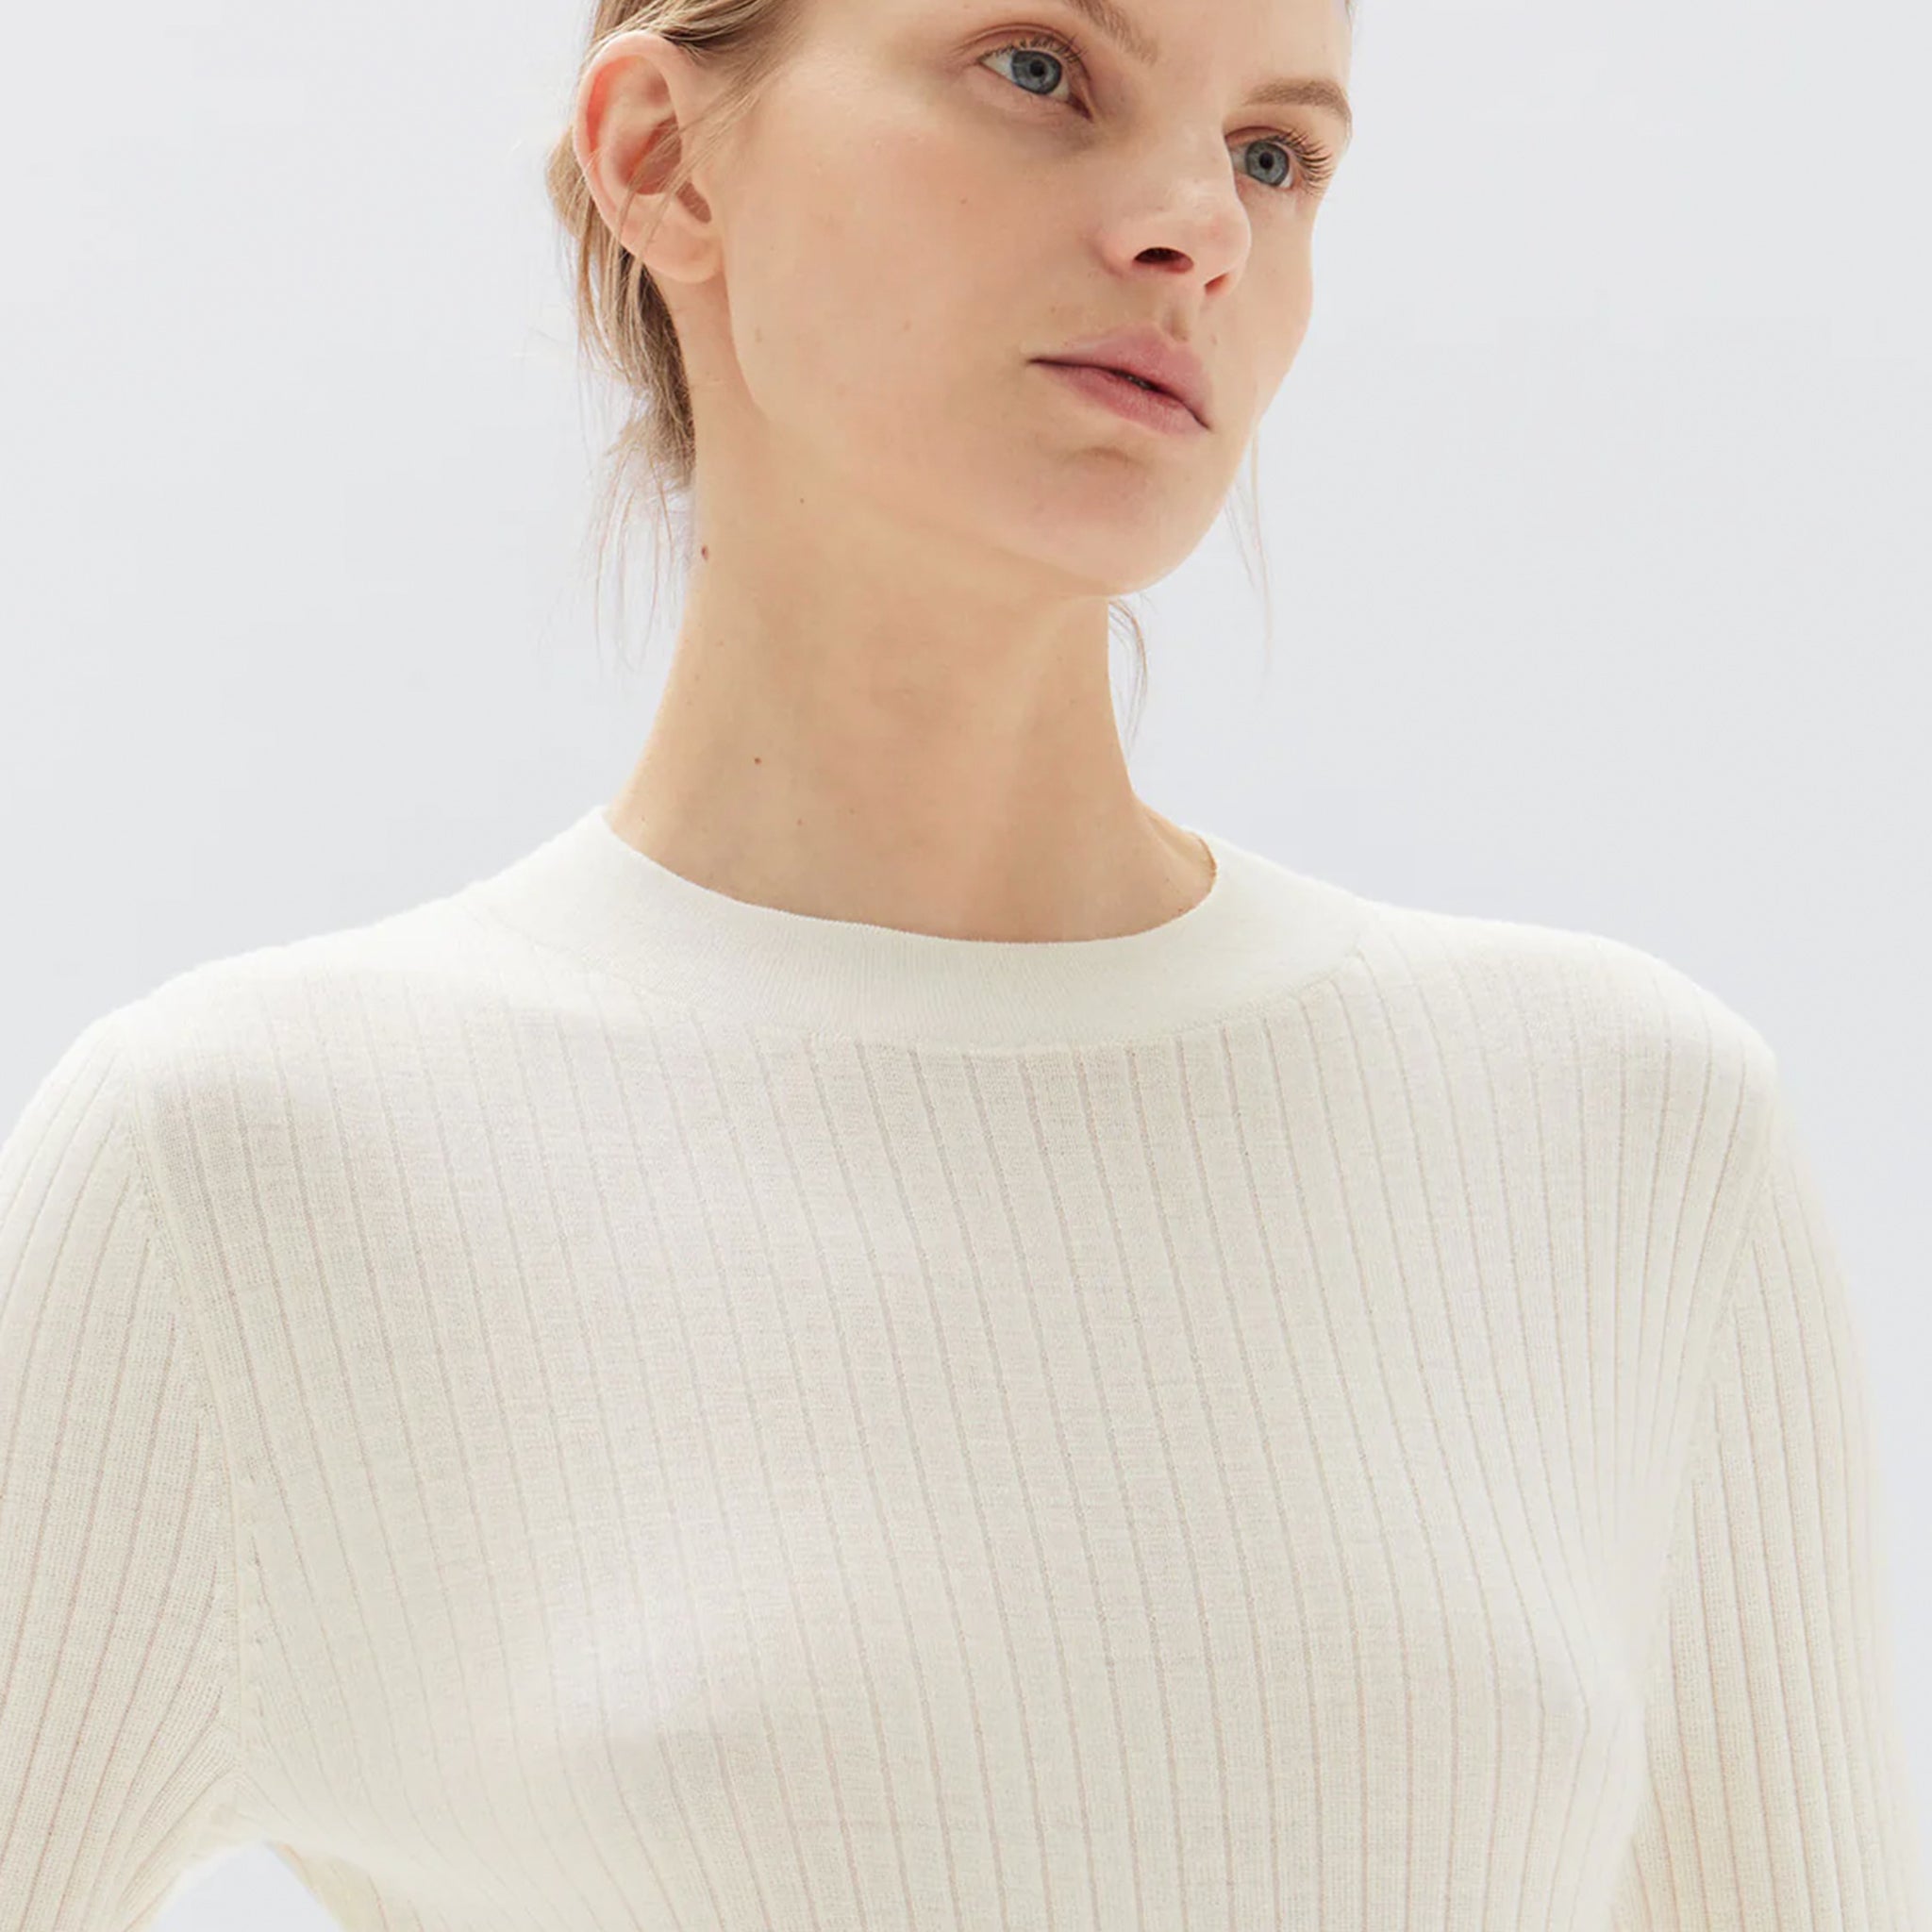 Assembly Label Mia Long Sleeve Knit - Antique White